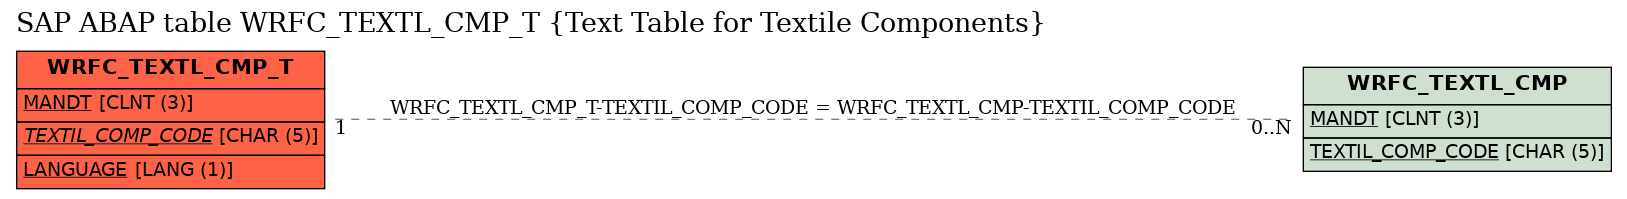 E-R Diagram for table WRFC_TEXTL_CMP_T (Text Table for Textile Components)